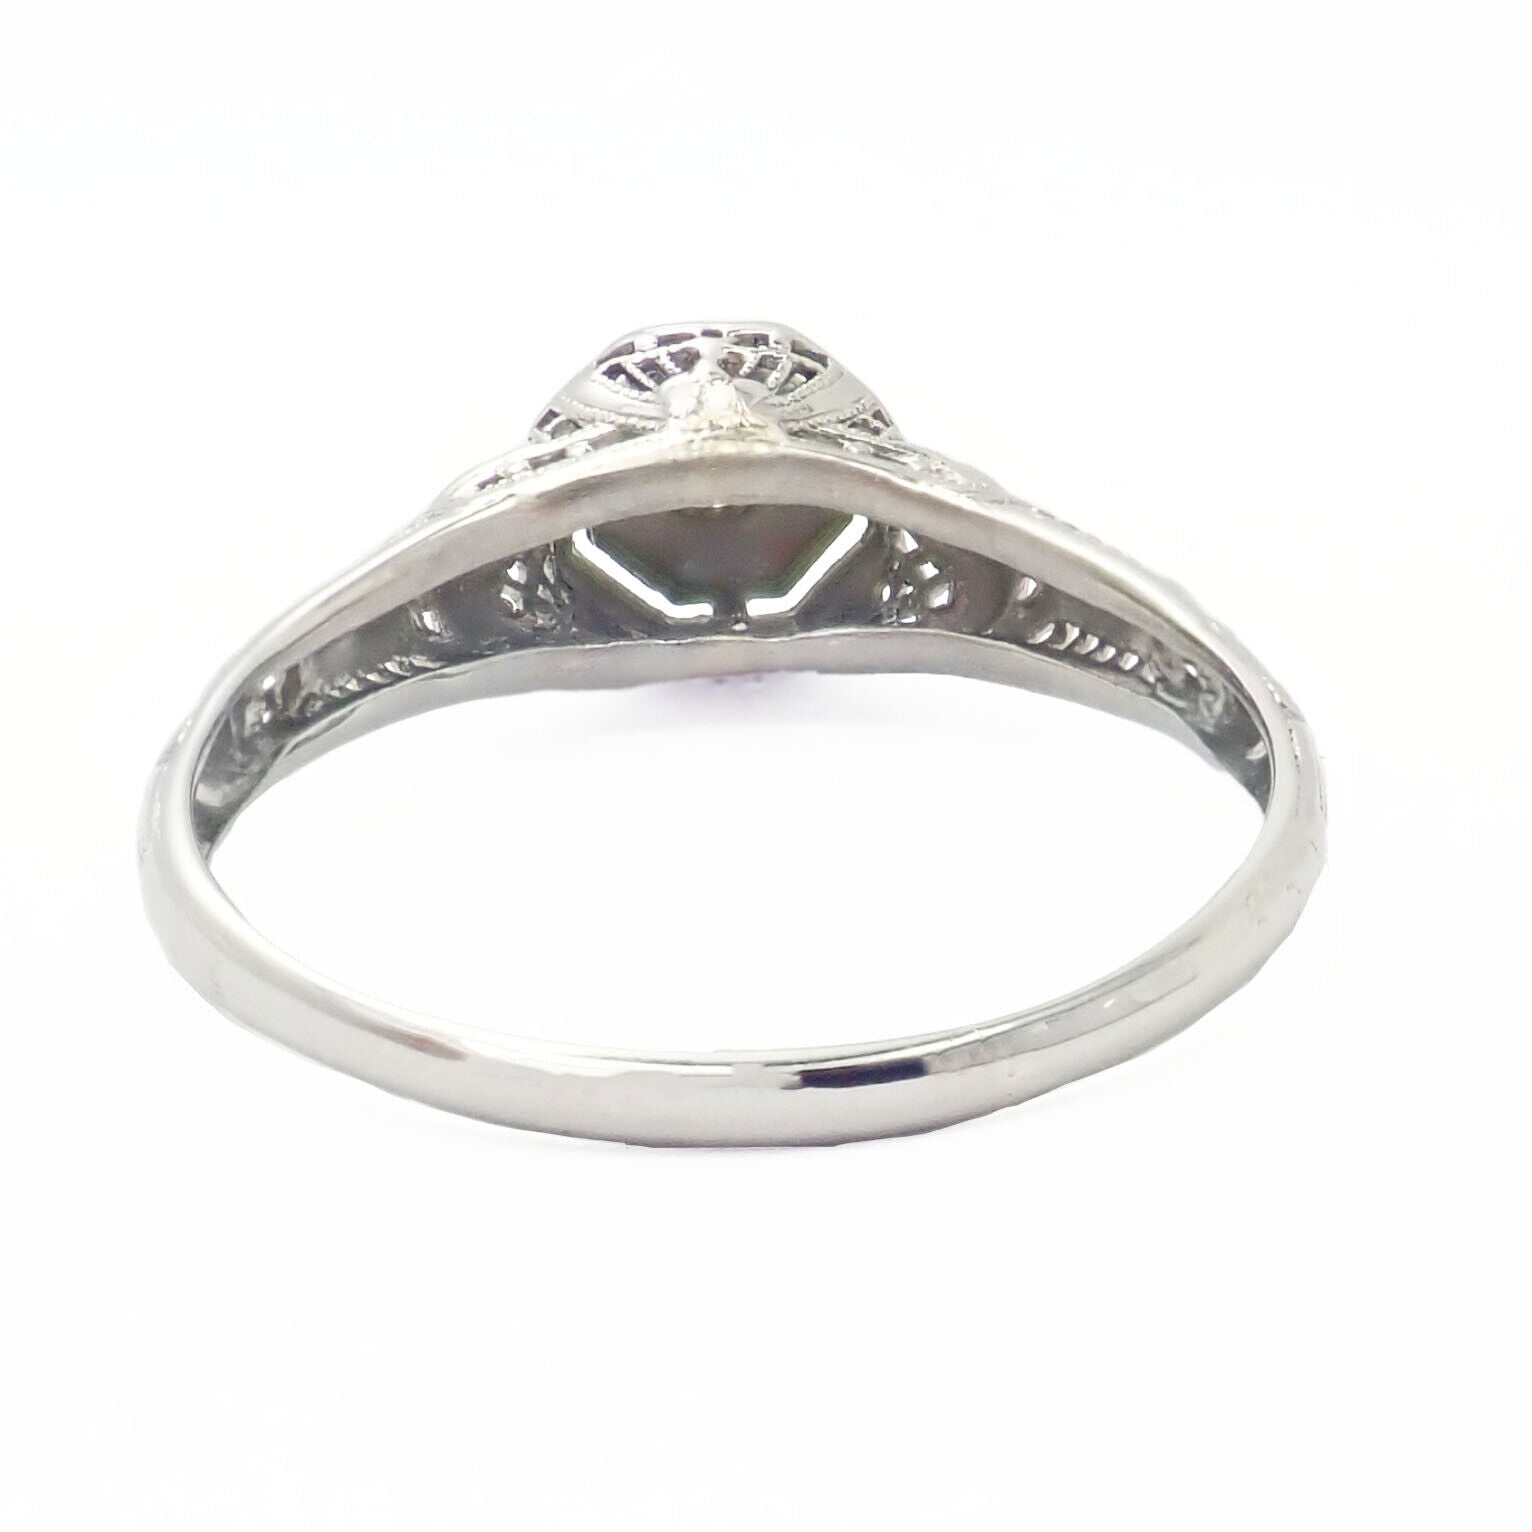 Estate Jewelry & Watches:Vintage & Antique Jewelry:Rings Vintage Estate 18k White Gold Old Mine Cut Diamond Art Deco Filigree Ring sz 8.5